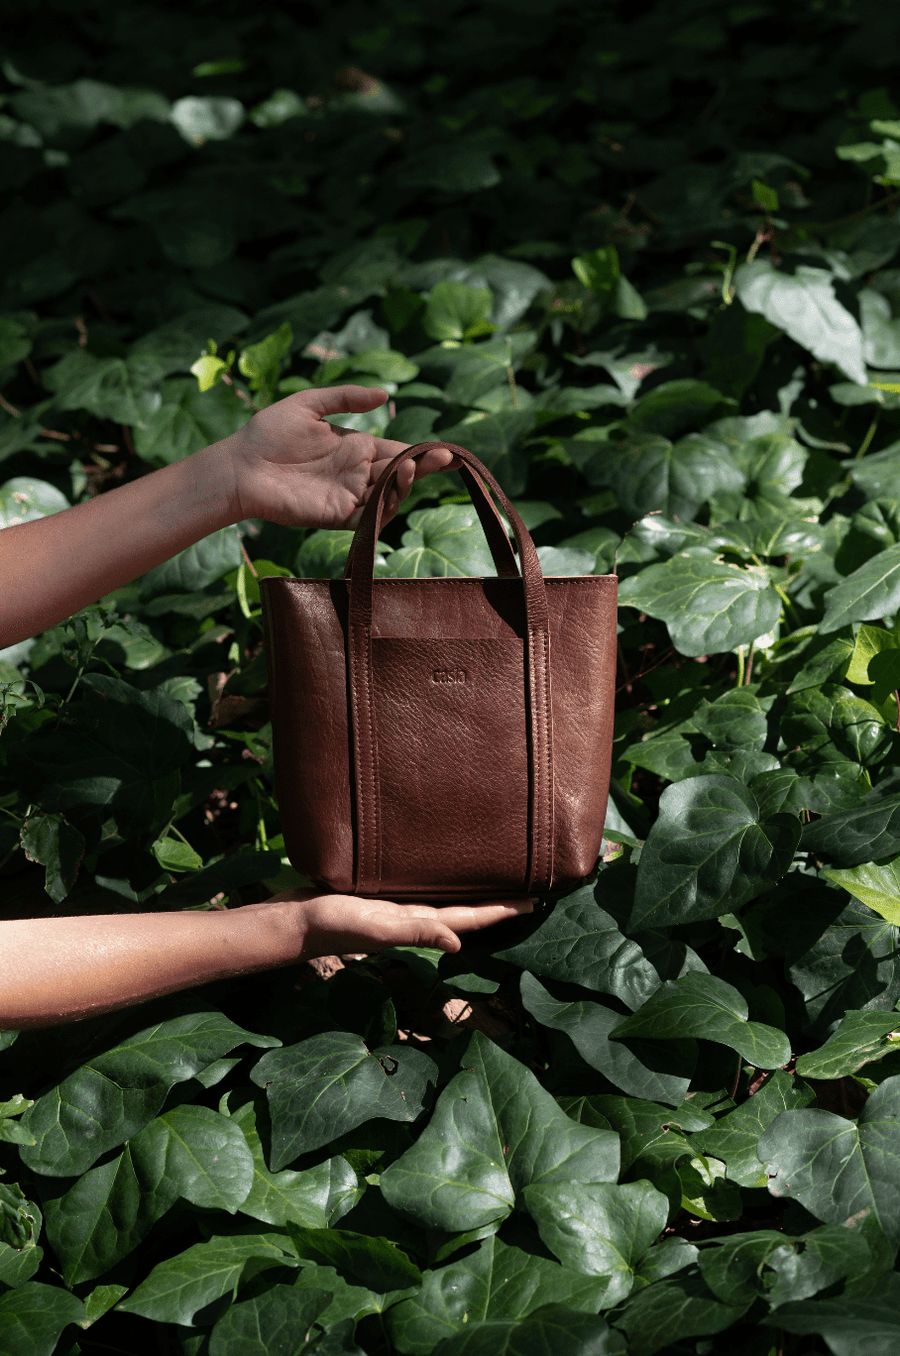 Full grain leather mini tote bag. Vegetable tanned leather shoulder bag. Leather brown purse.